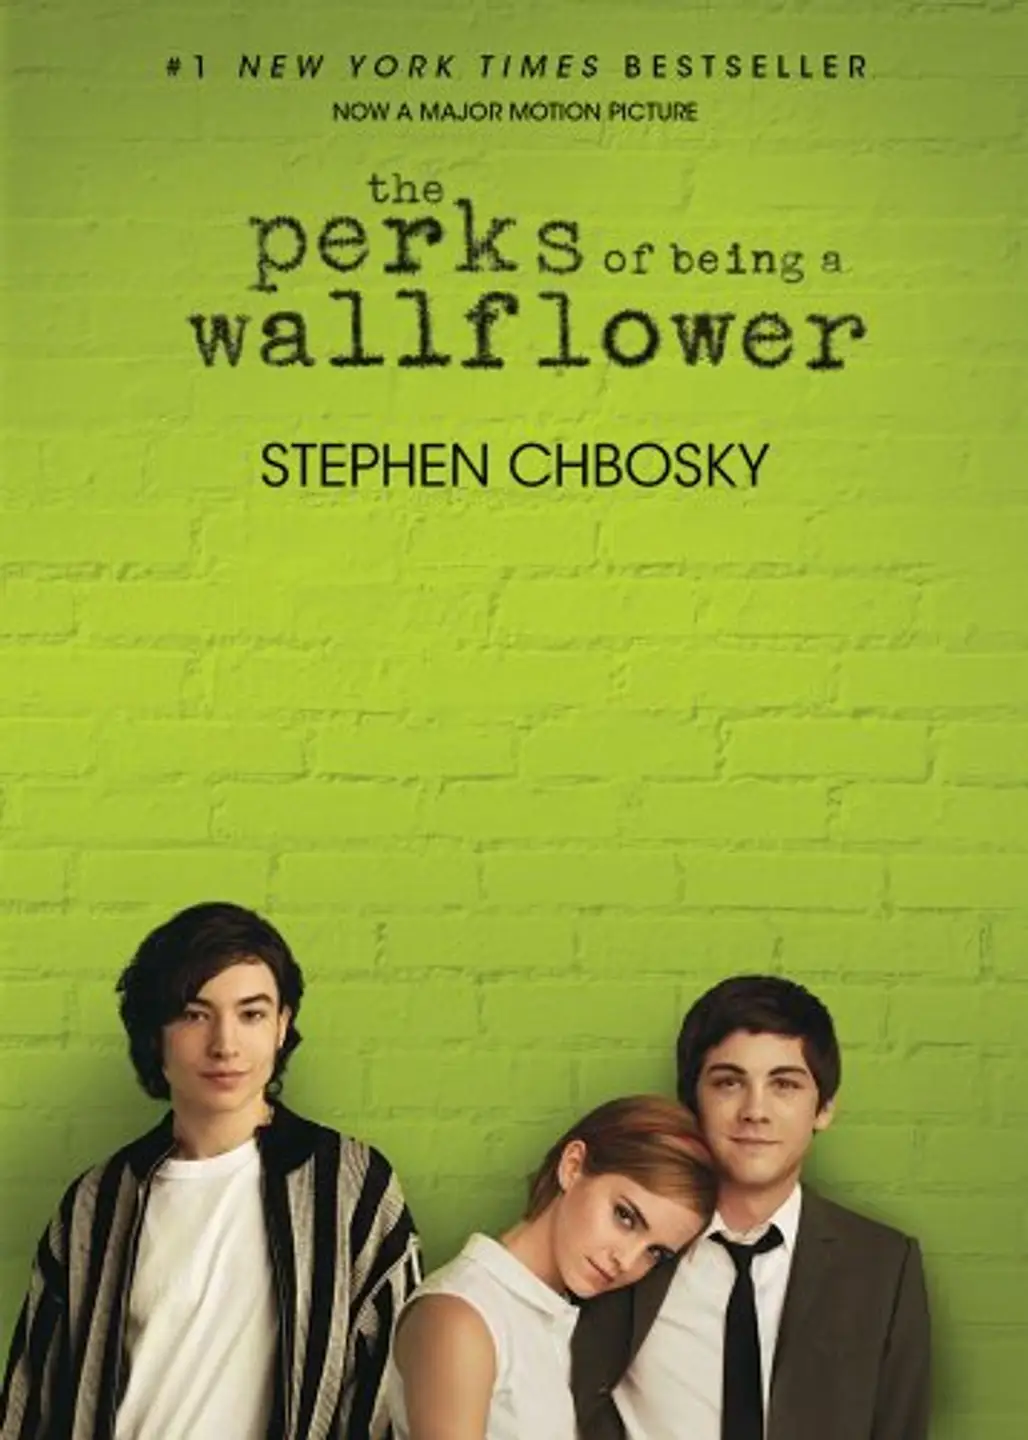 The Perks of Being a Wallflower by Stephen Chobsky